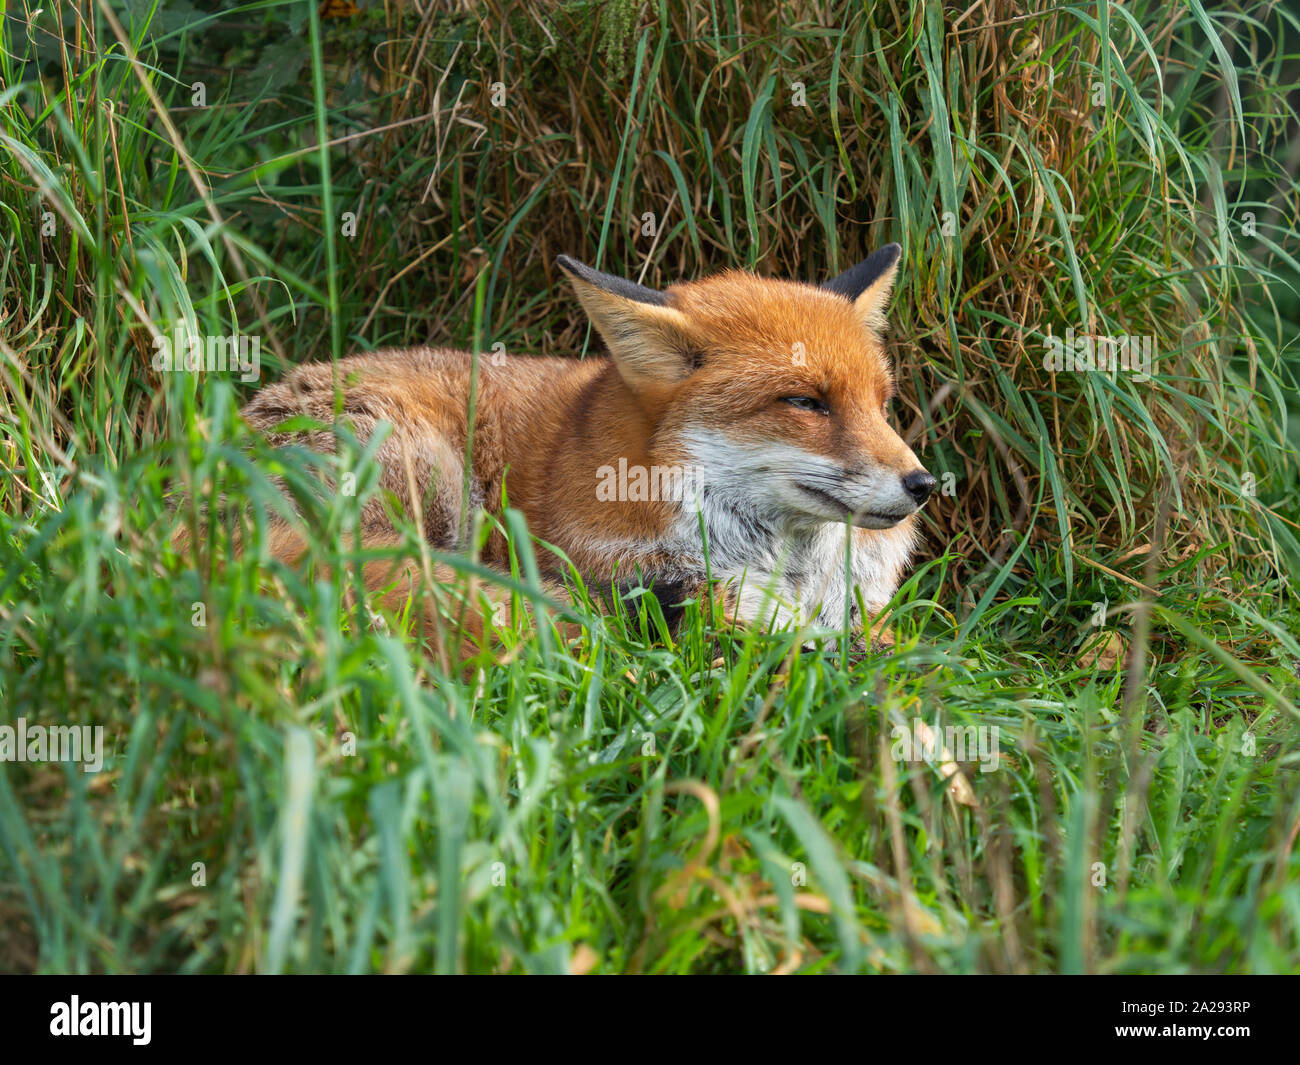 Red fox (Vulpes vulpes) close up with a grass background Stock Photo